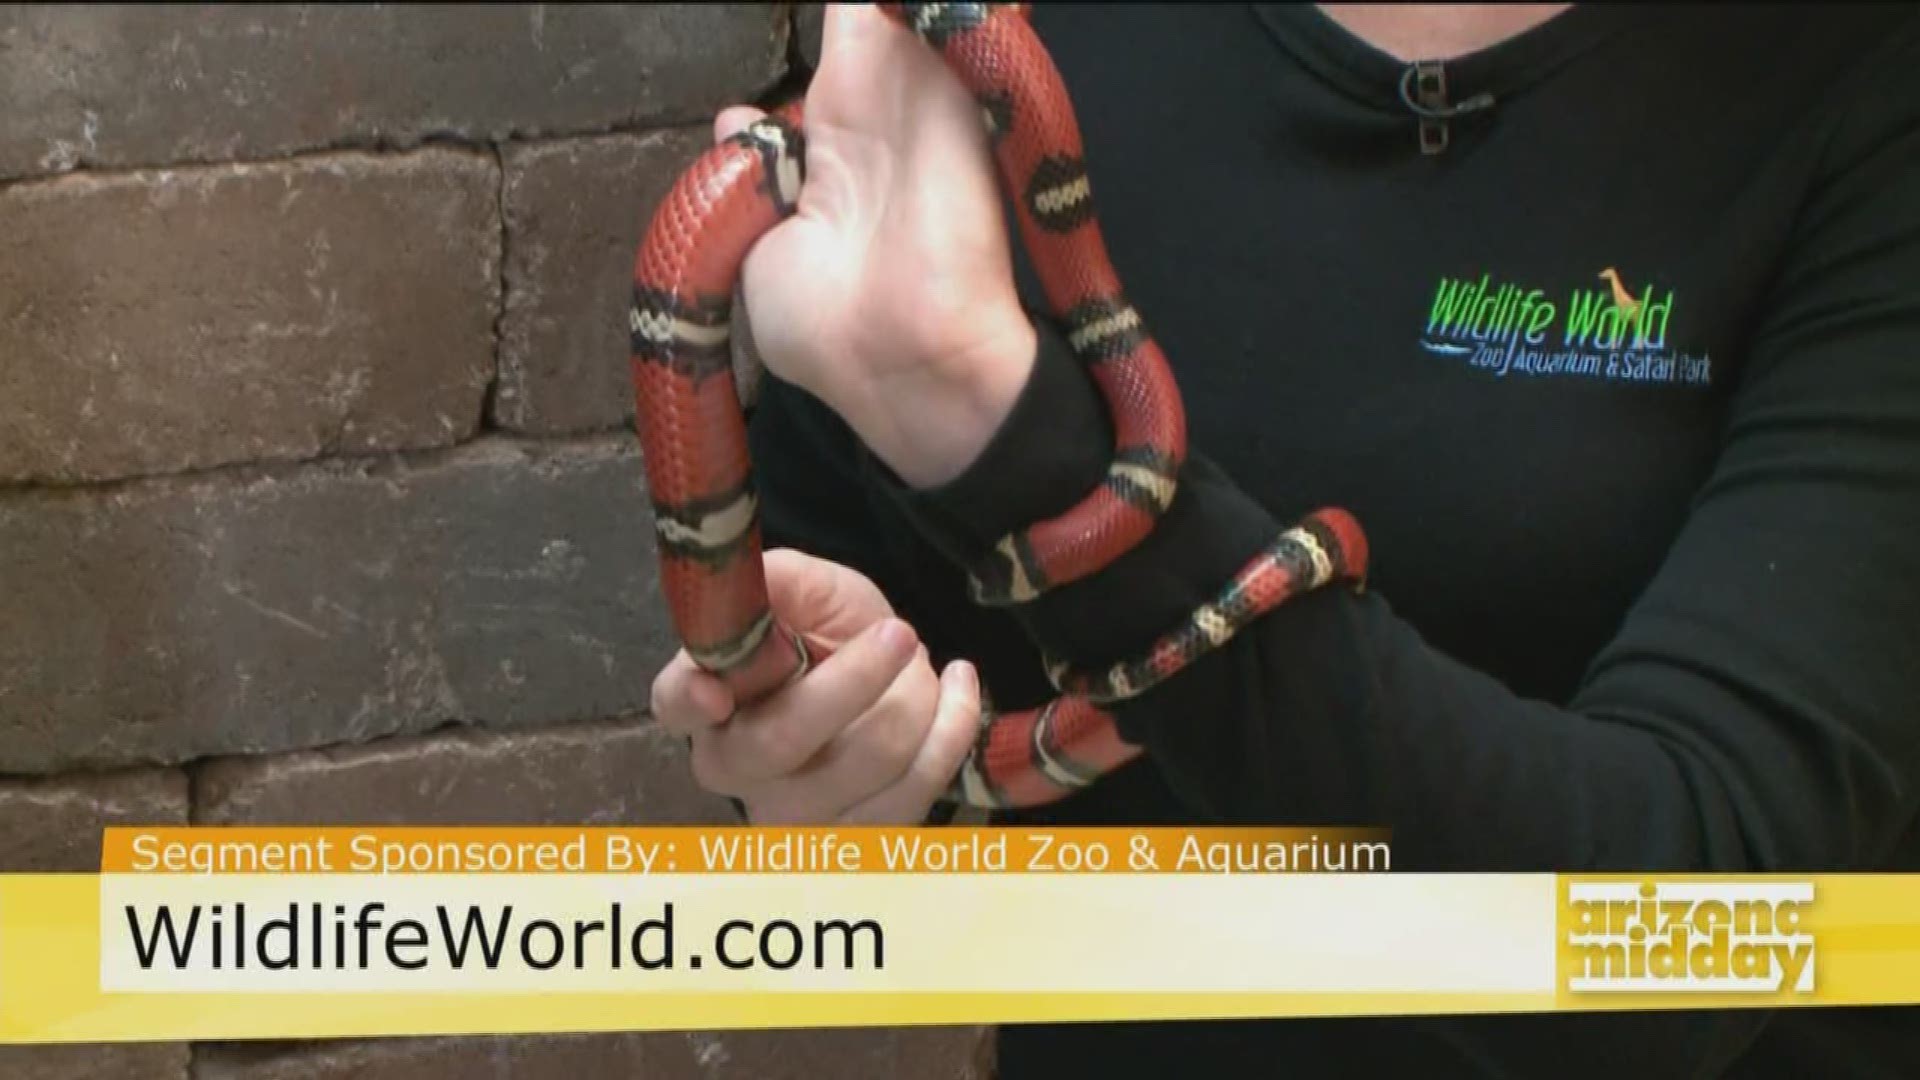 Handler Kristy Morcom brings in a Milk Snake and talks to us about all of the fun that we can have at the Wildlife World Zoo